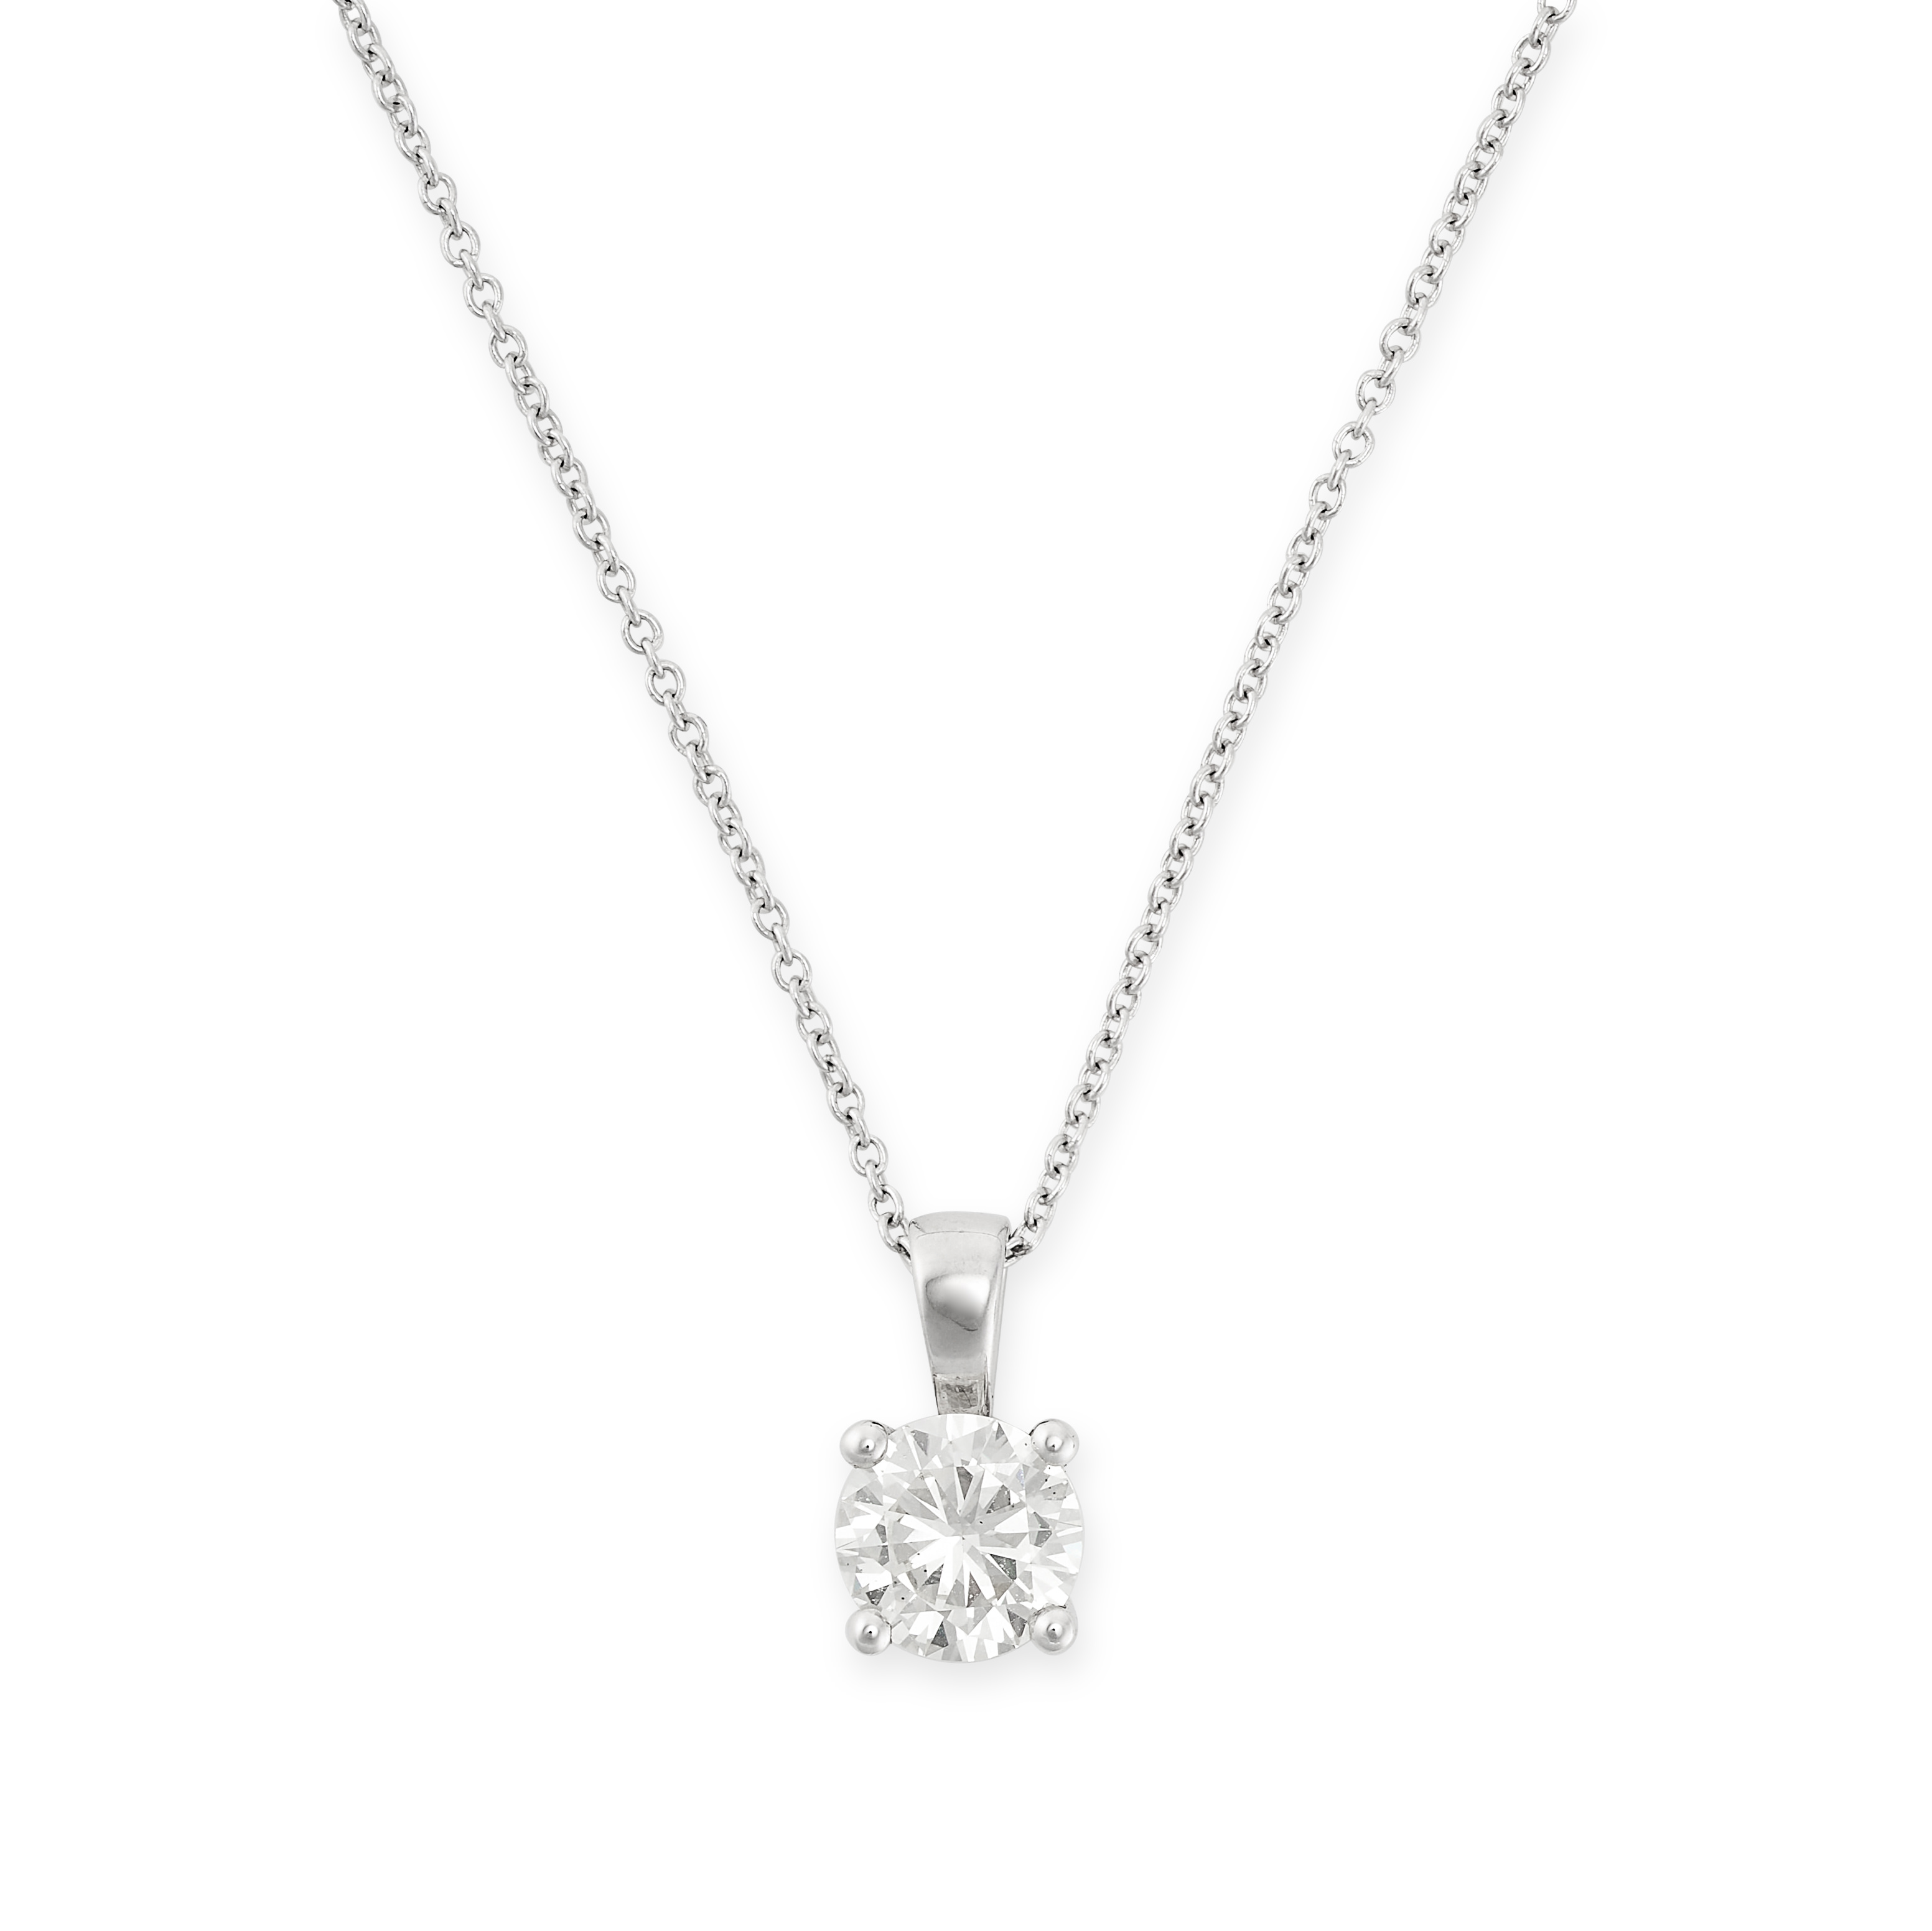 A SOLITAIRE DIAMOND PENDANT AND CHAIN in 18ct white gold, the pendant set with a round brilliant cut